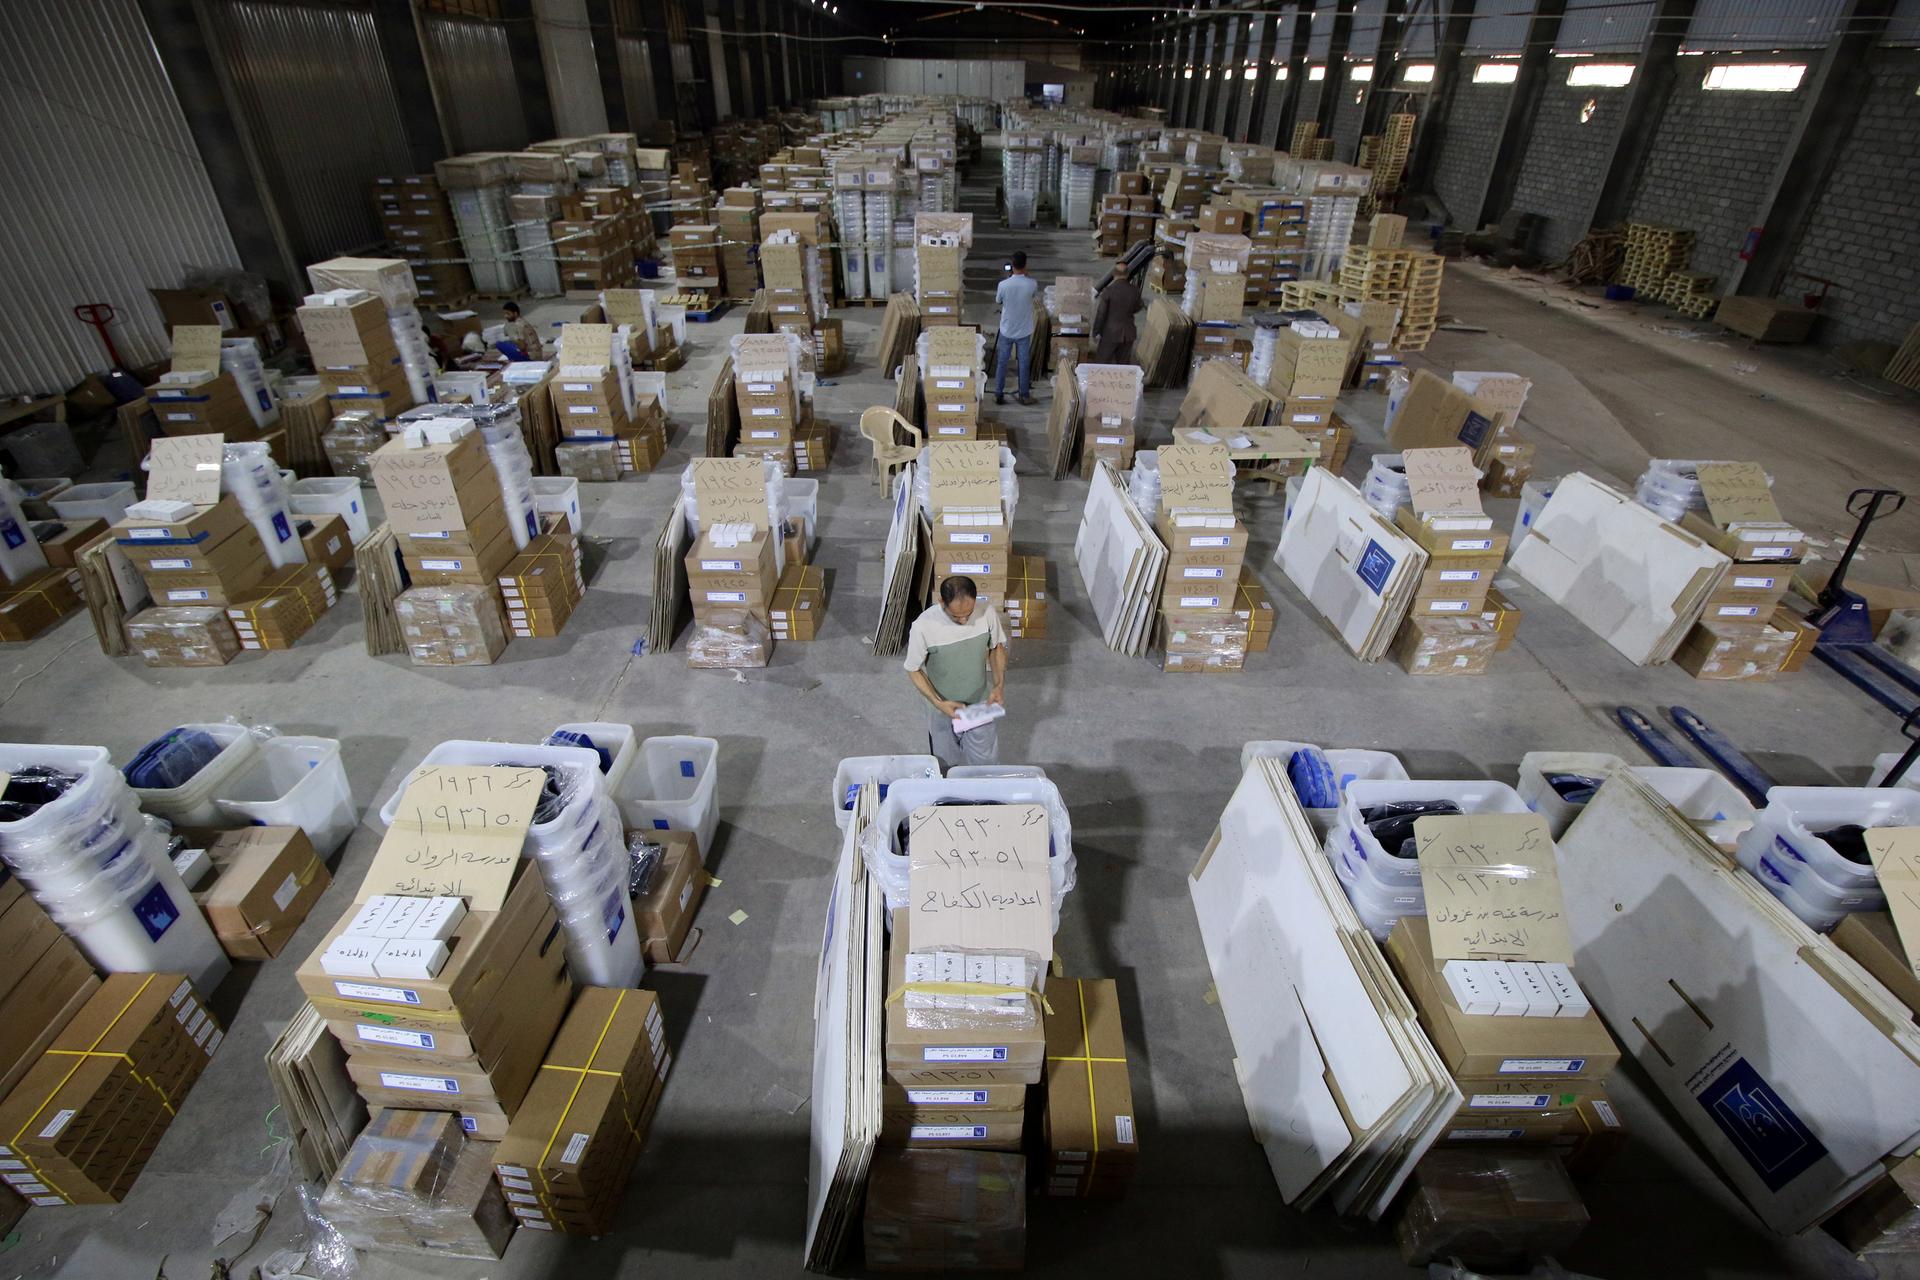 Employees of Iraqi Independent High Electoral Commission inspect voting materials at a warehouse in Basra, Iraq, May 3, 2018.